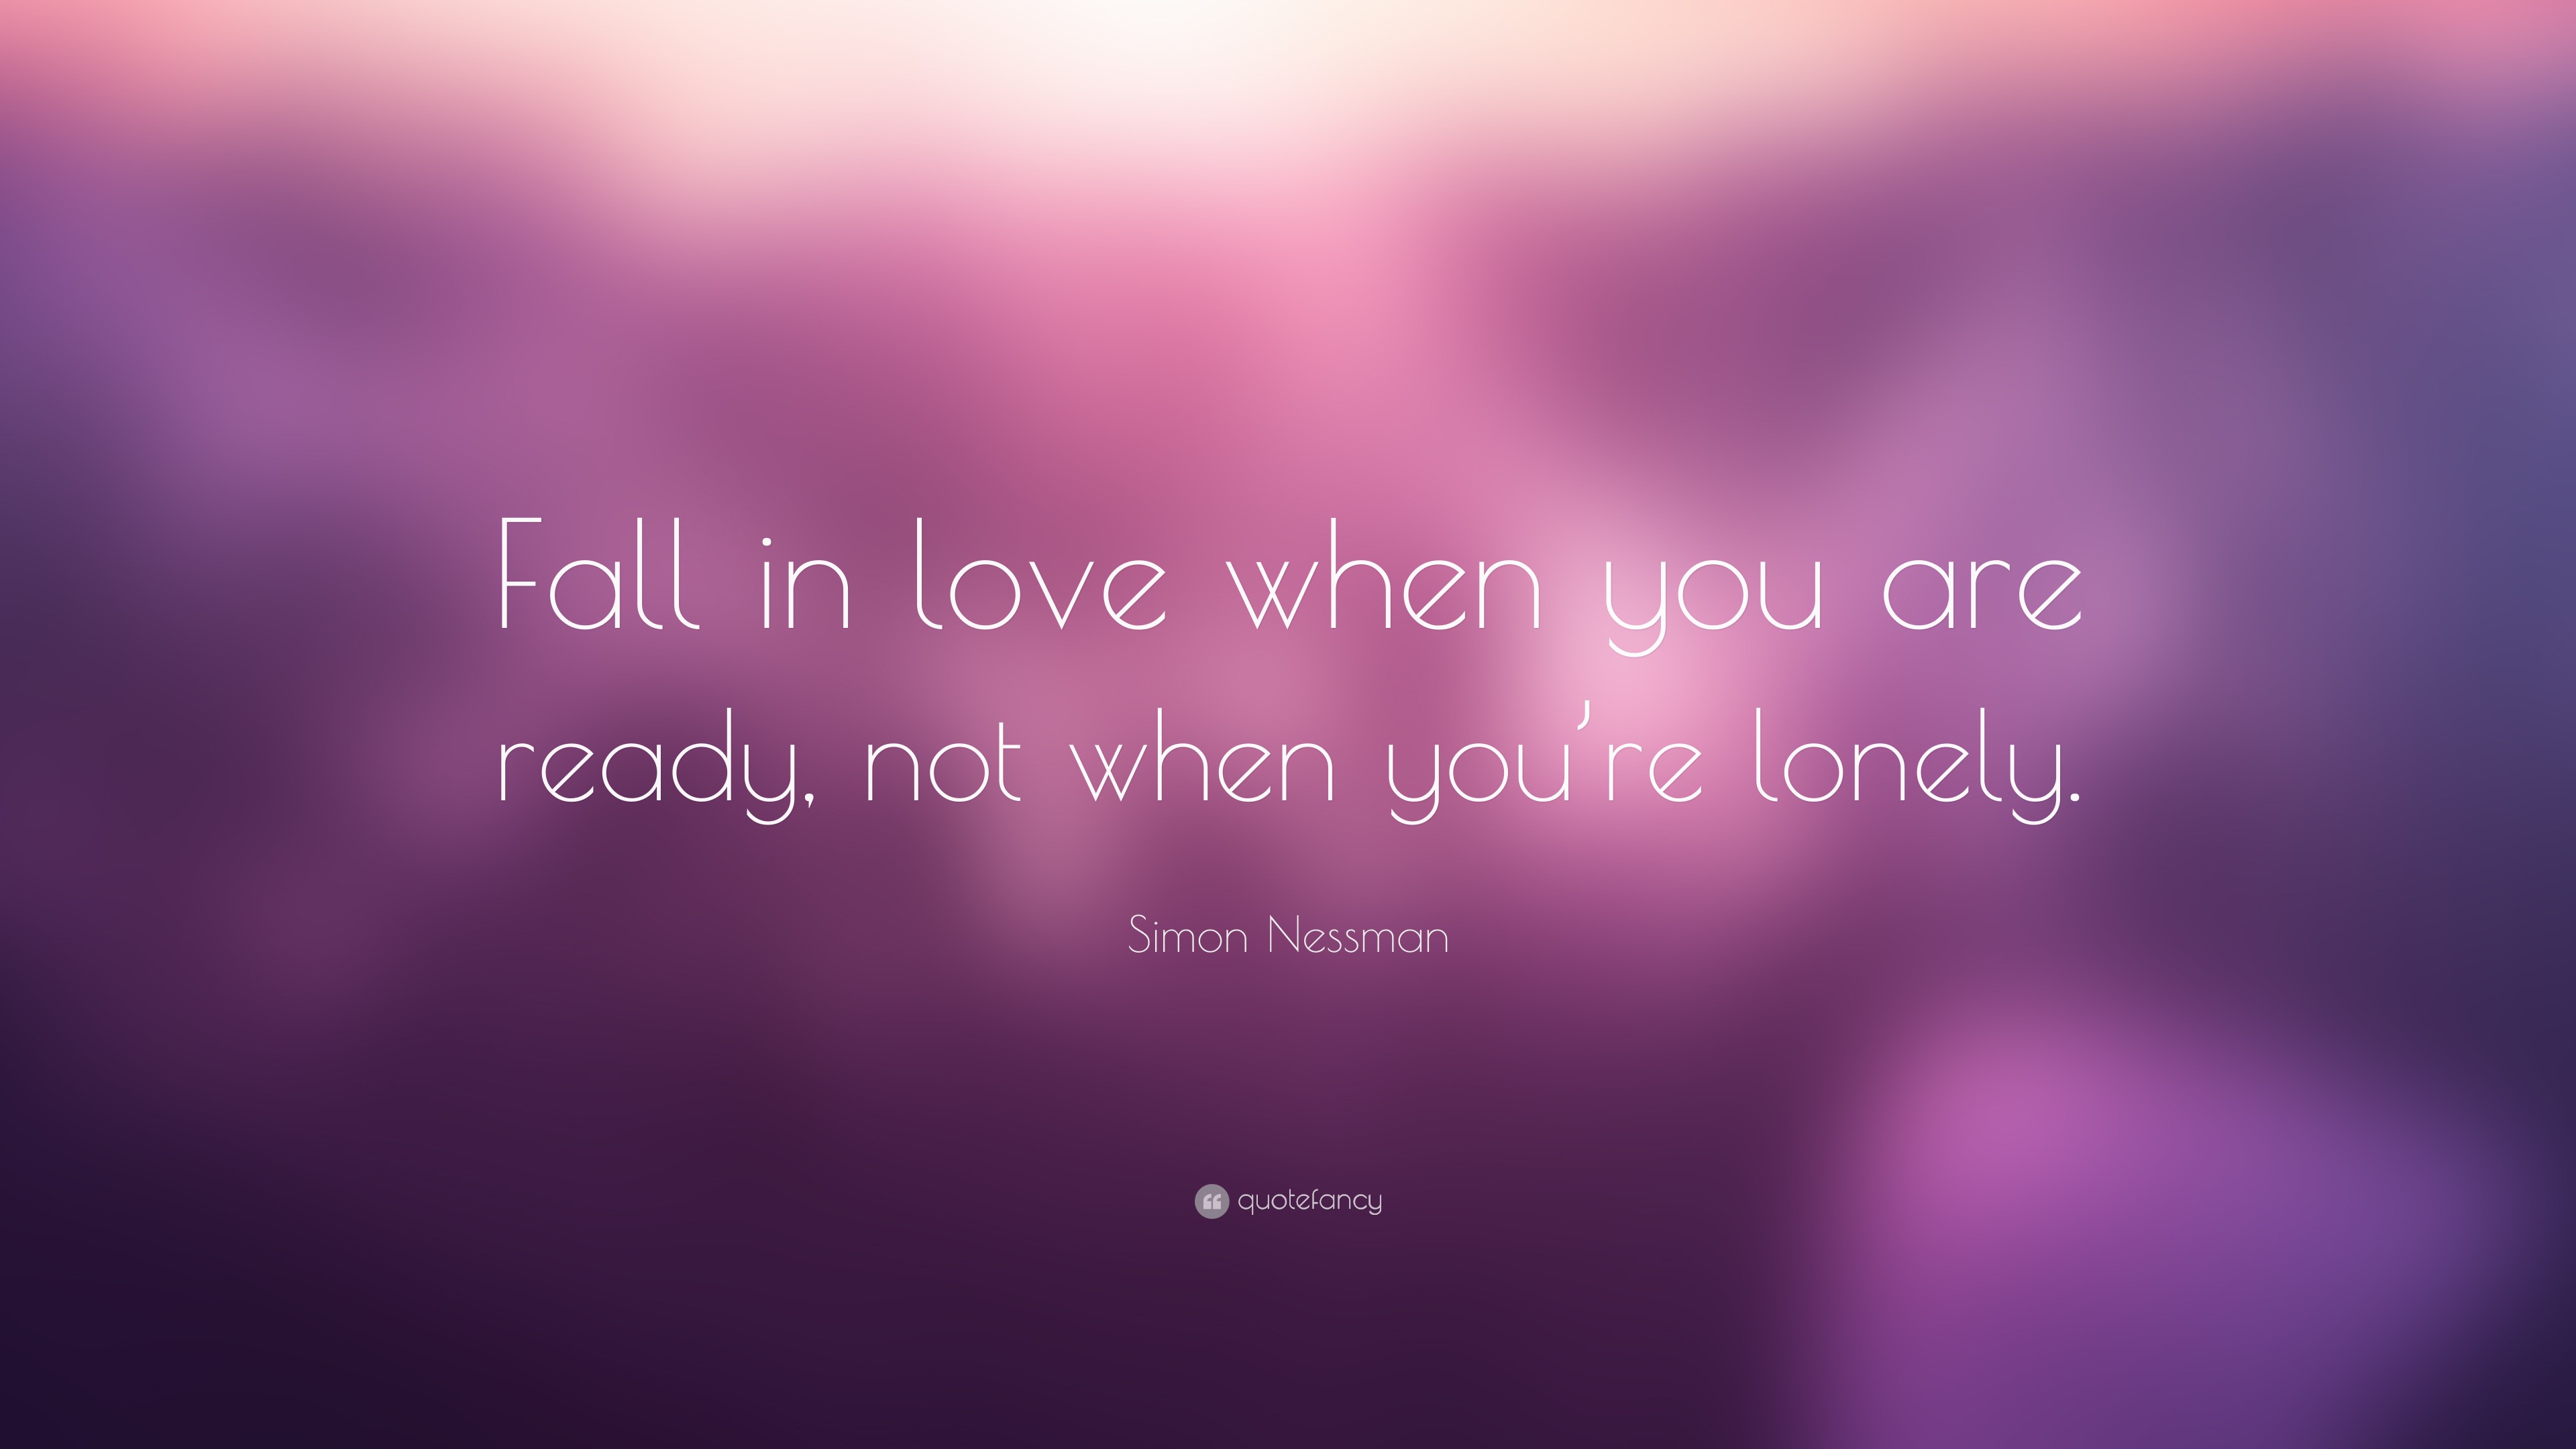 Simon Nessman Quote “Fall in love when you are ready not when you